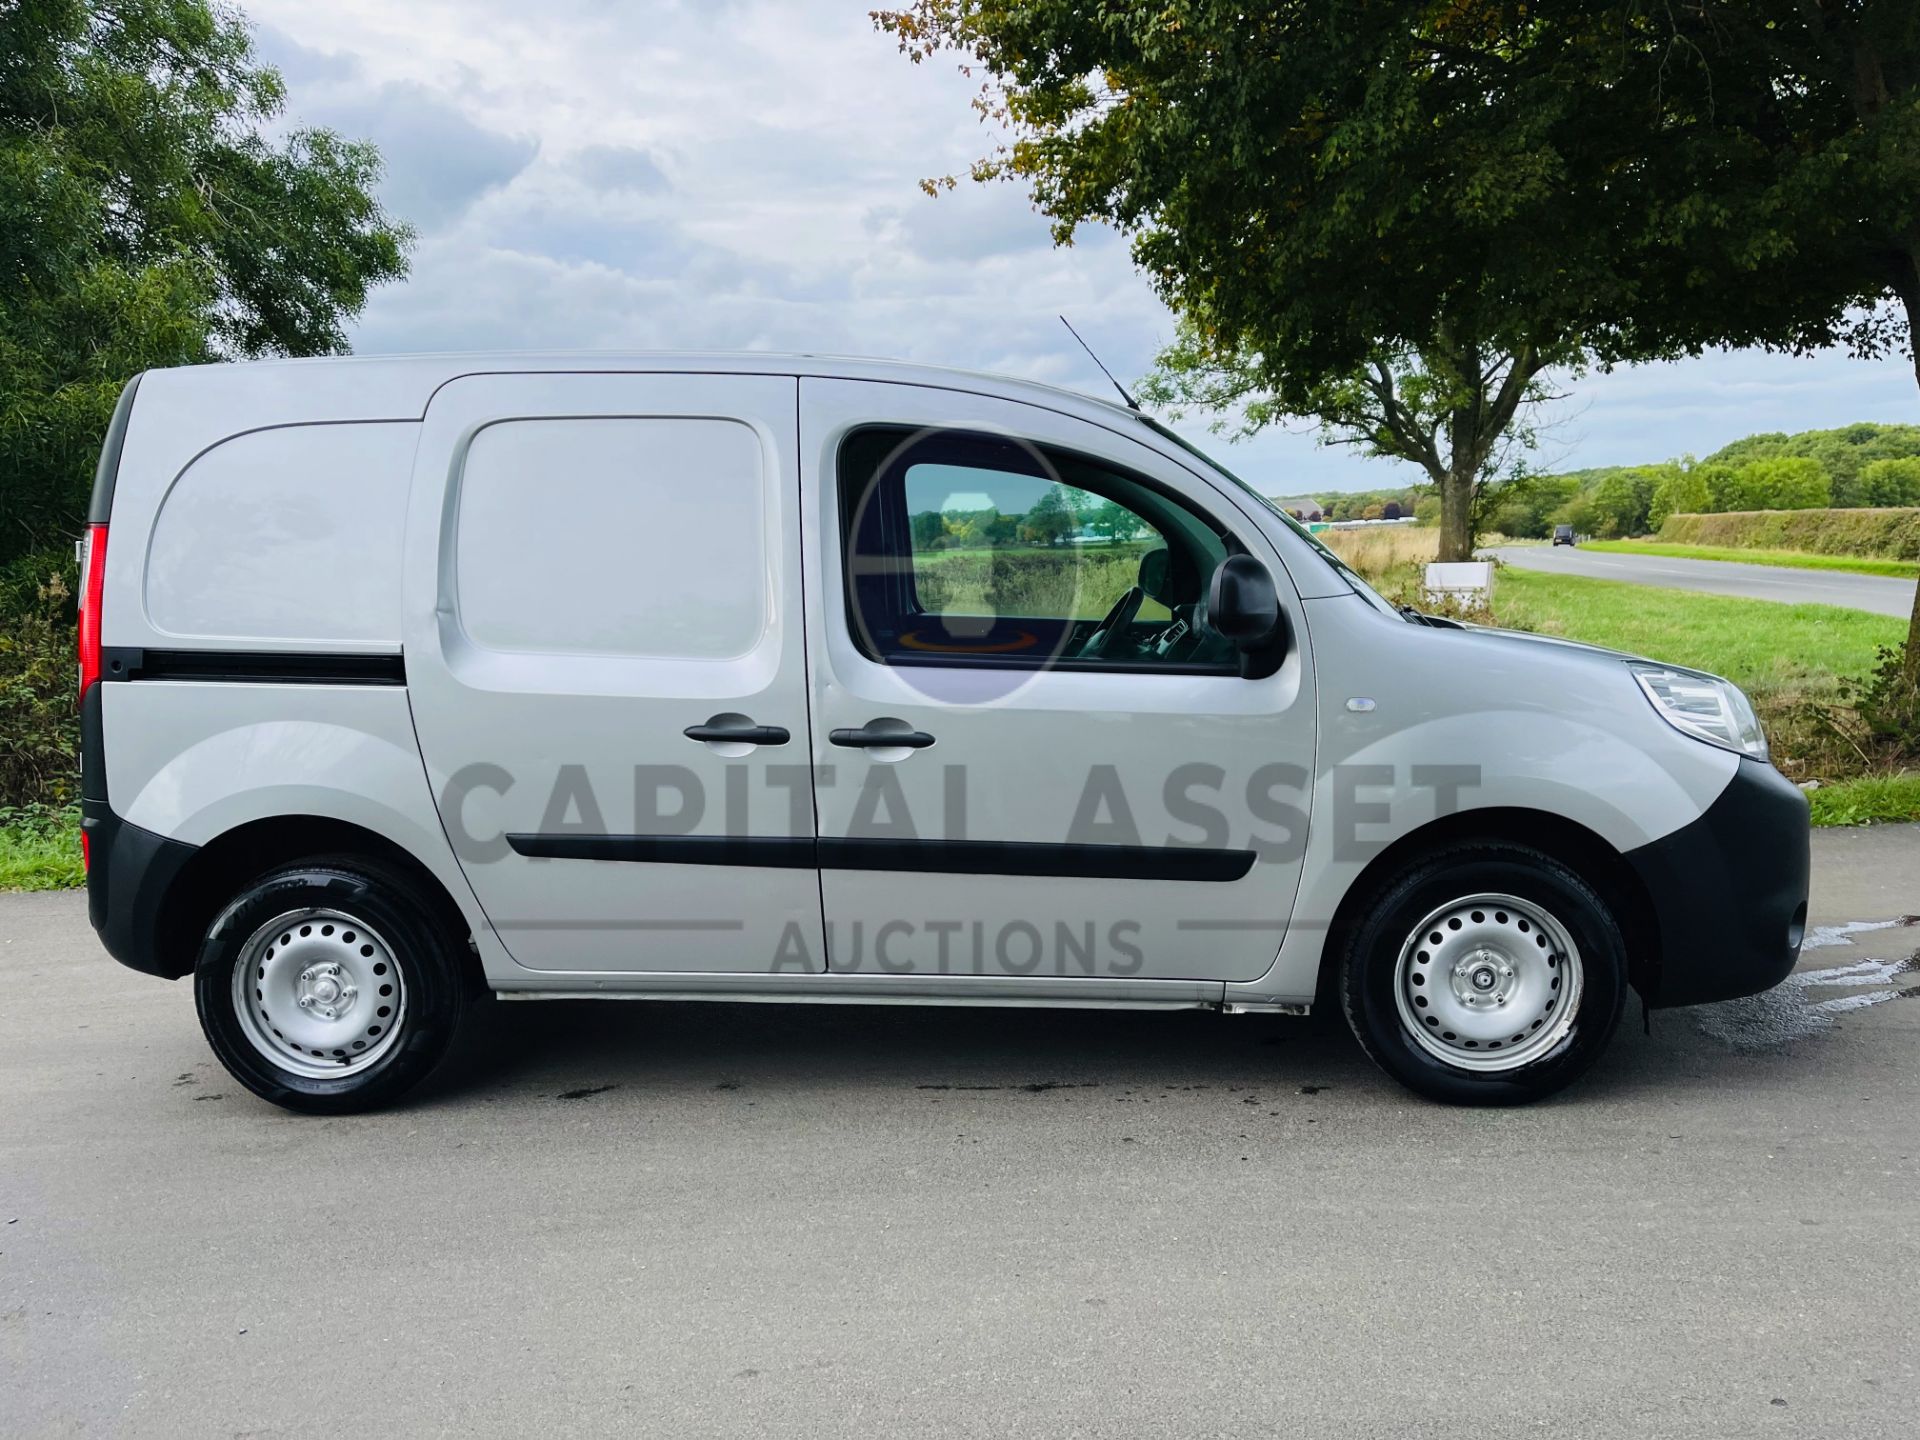 RENAULT KANGOO 1.5DCI "BUSINESS EDITION" 2018 -EURO 6/STOP START (AIR CON) ELEC PACK-TWIN SIDE DOORS - Image 8 of 21